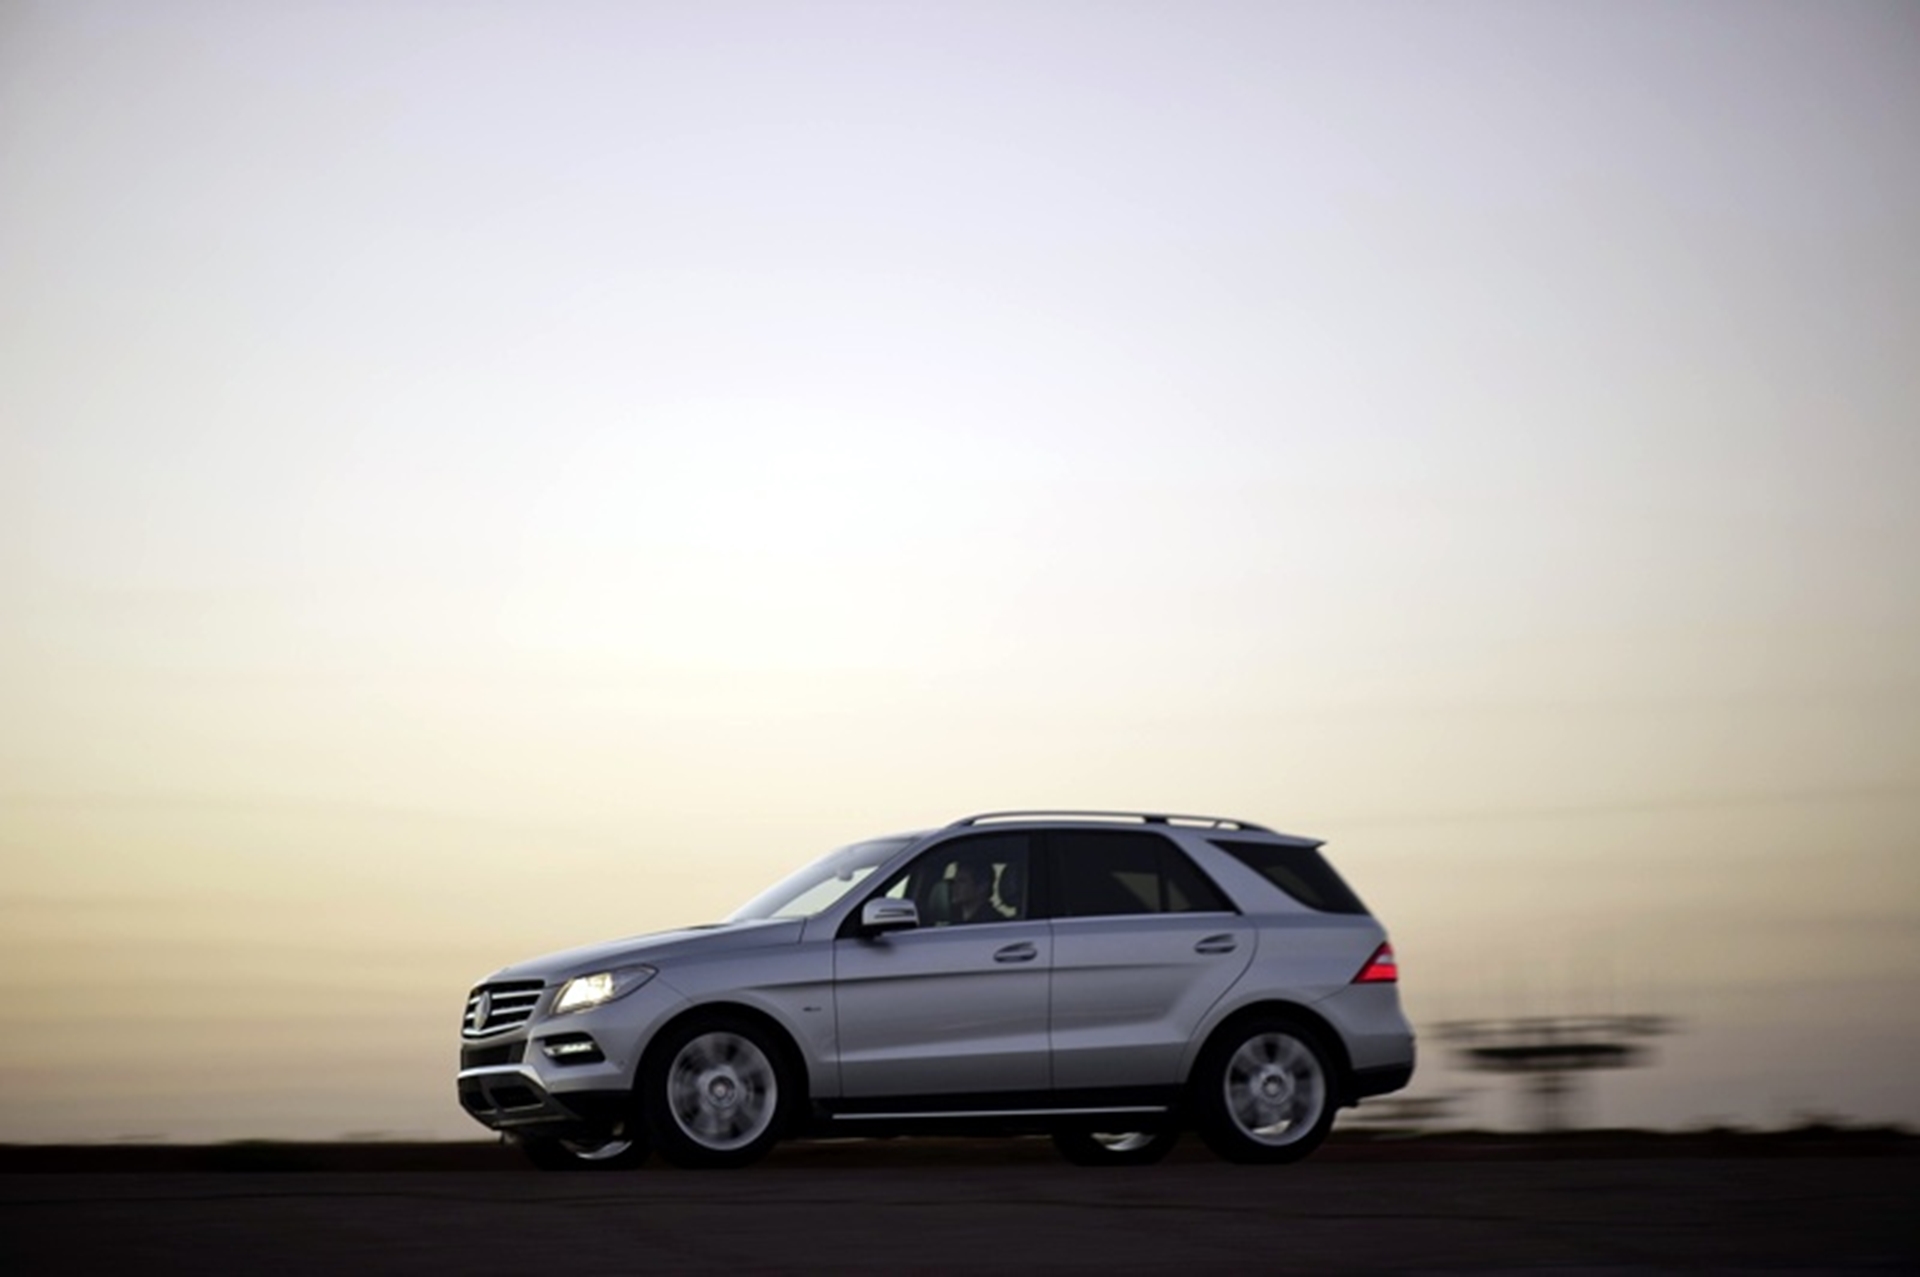 A SPECIAL INTRODUCTION TO THE NEW MERCEDES-BENZ M-CLASS